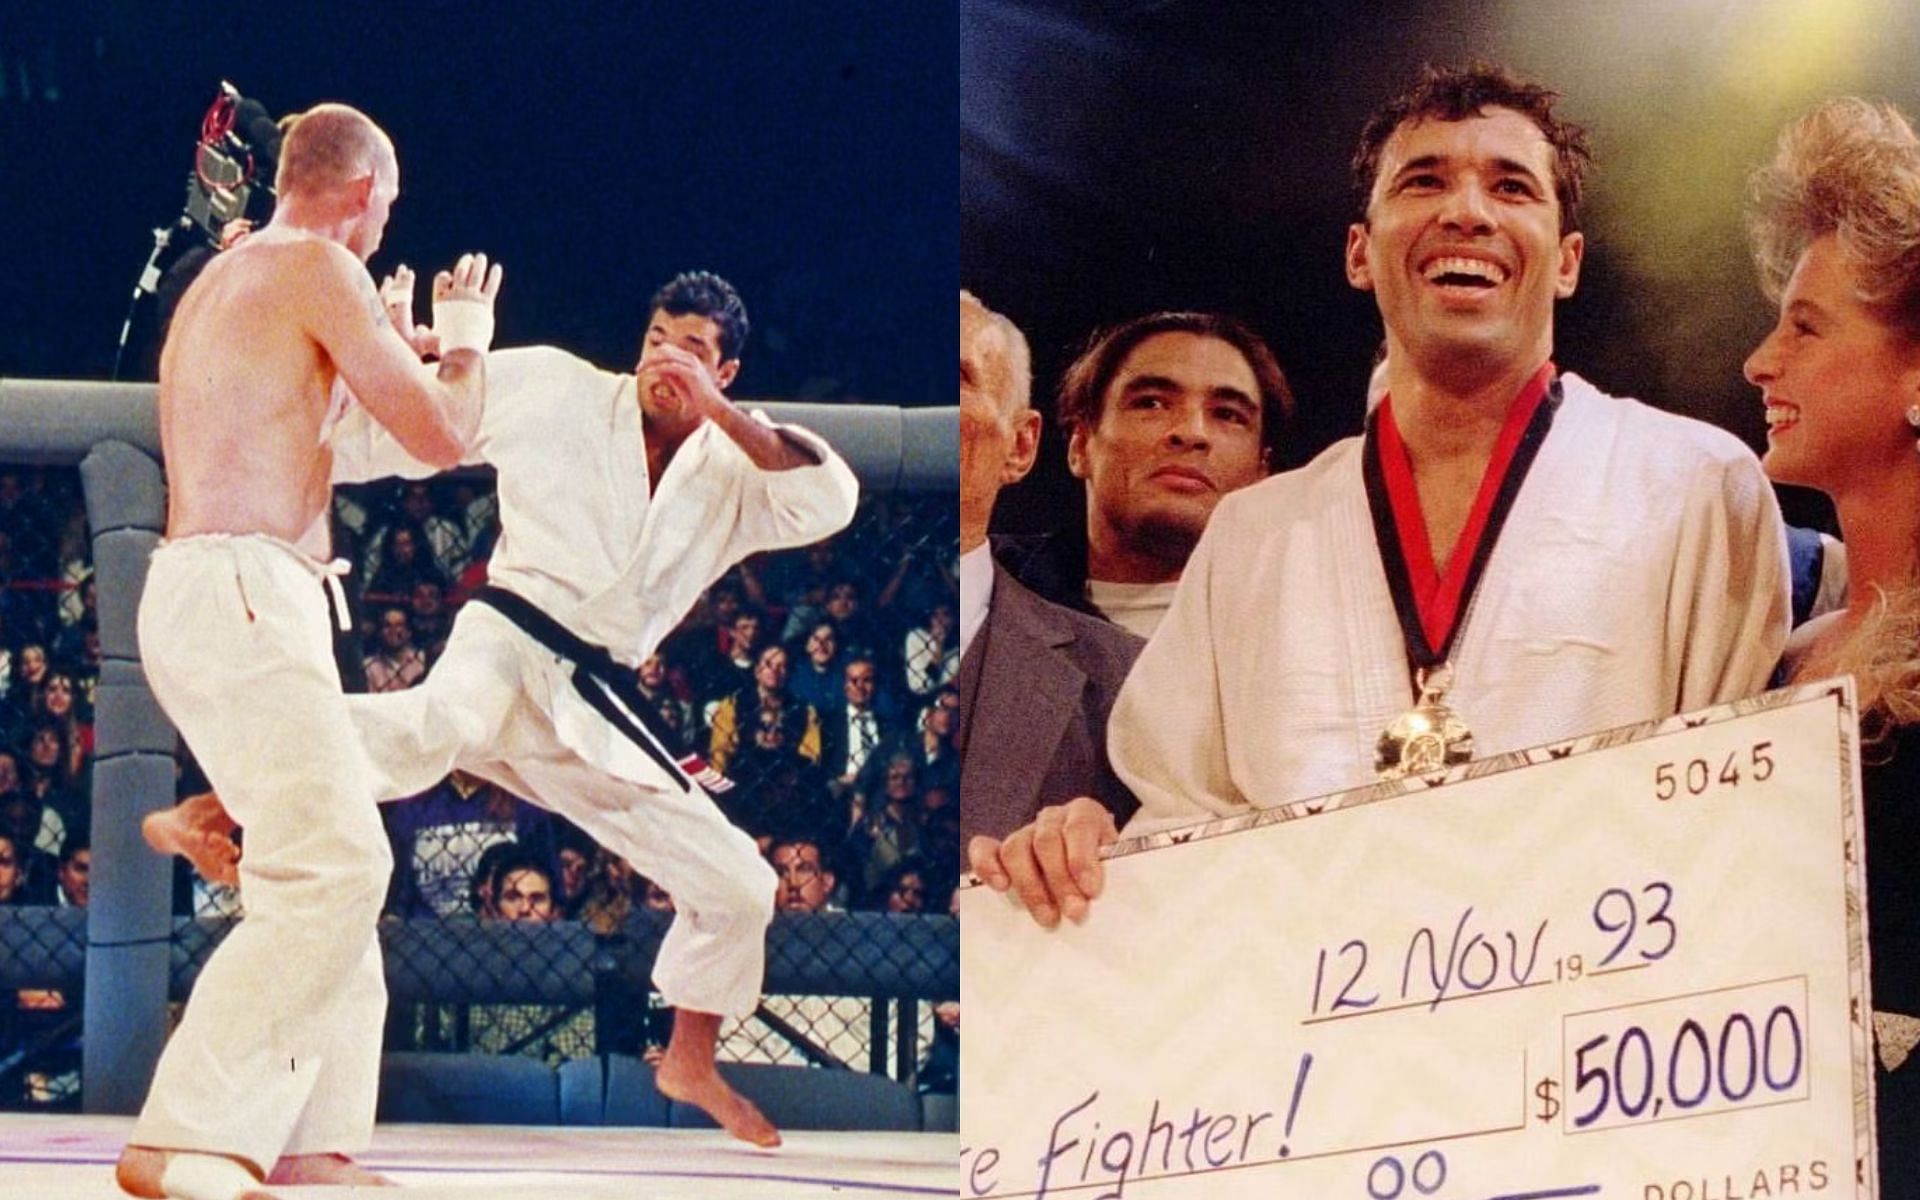 Hall of Famer Royce Gracie recounts wild exchange with Gerard Gordeau in UFC 1 finals [Image courtesy: Getty Images]